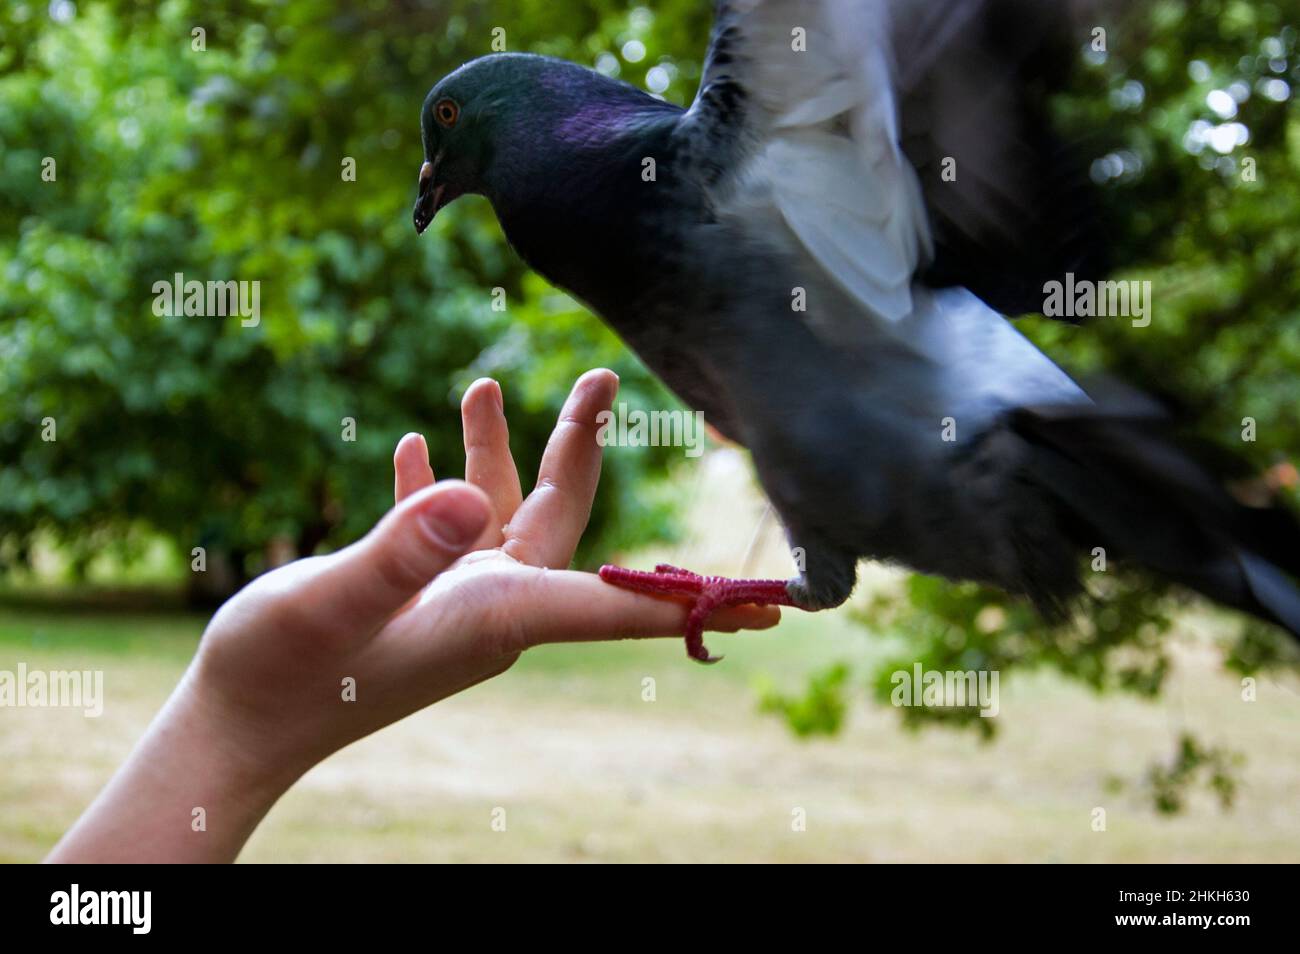 Pigeon landing on a person's hand Stock Photo